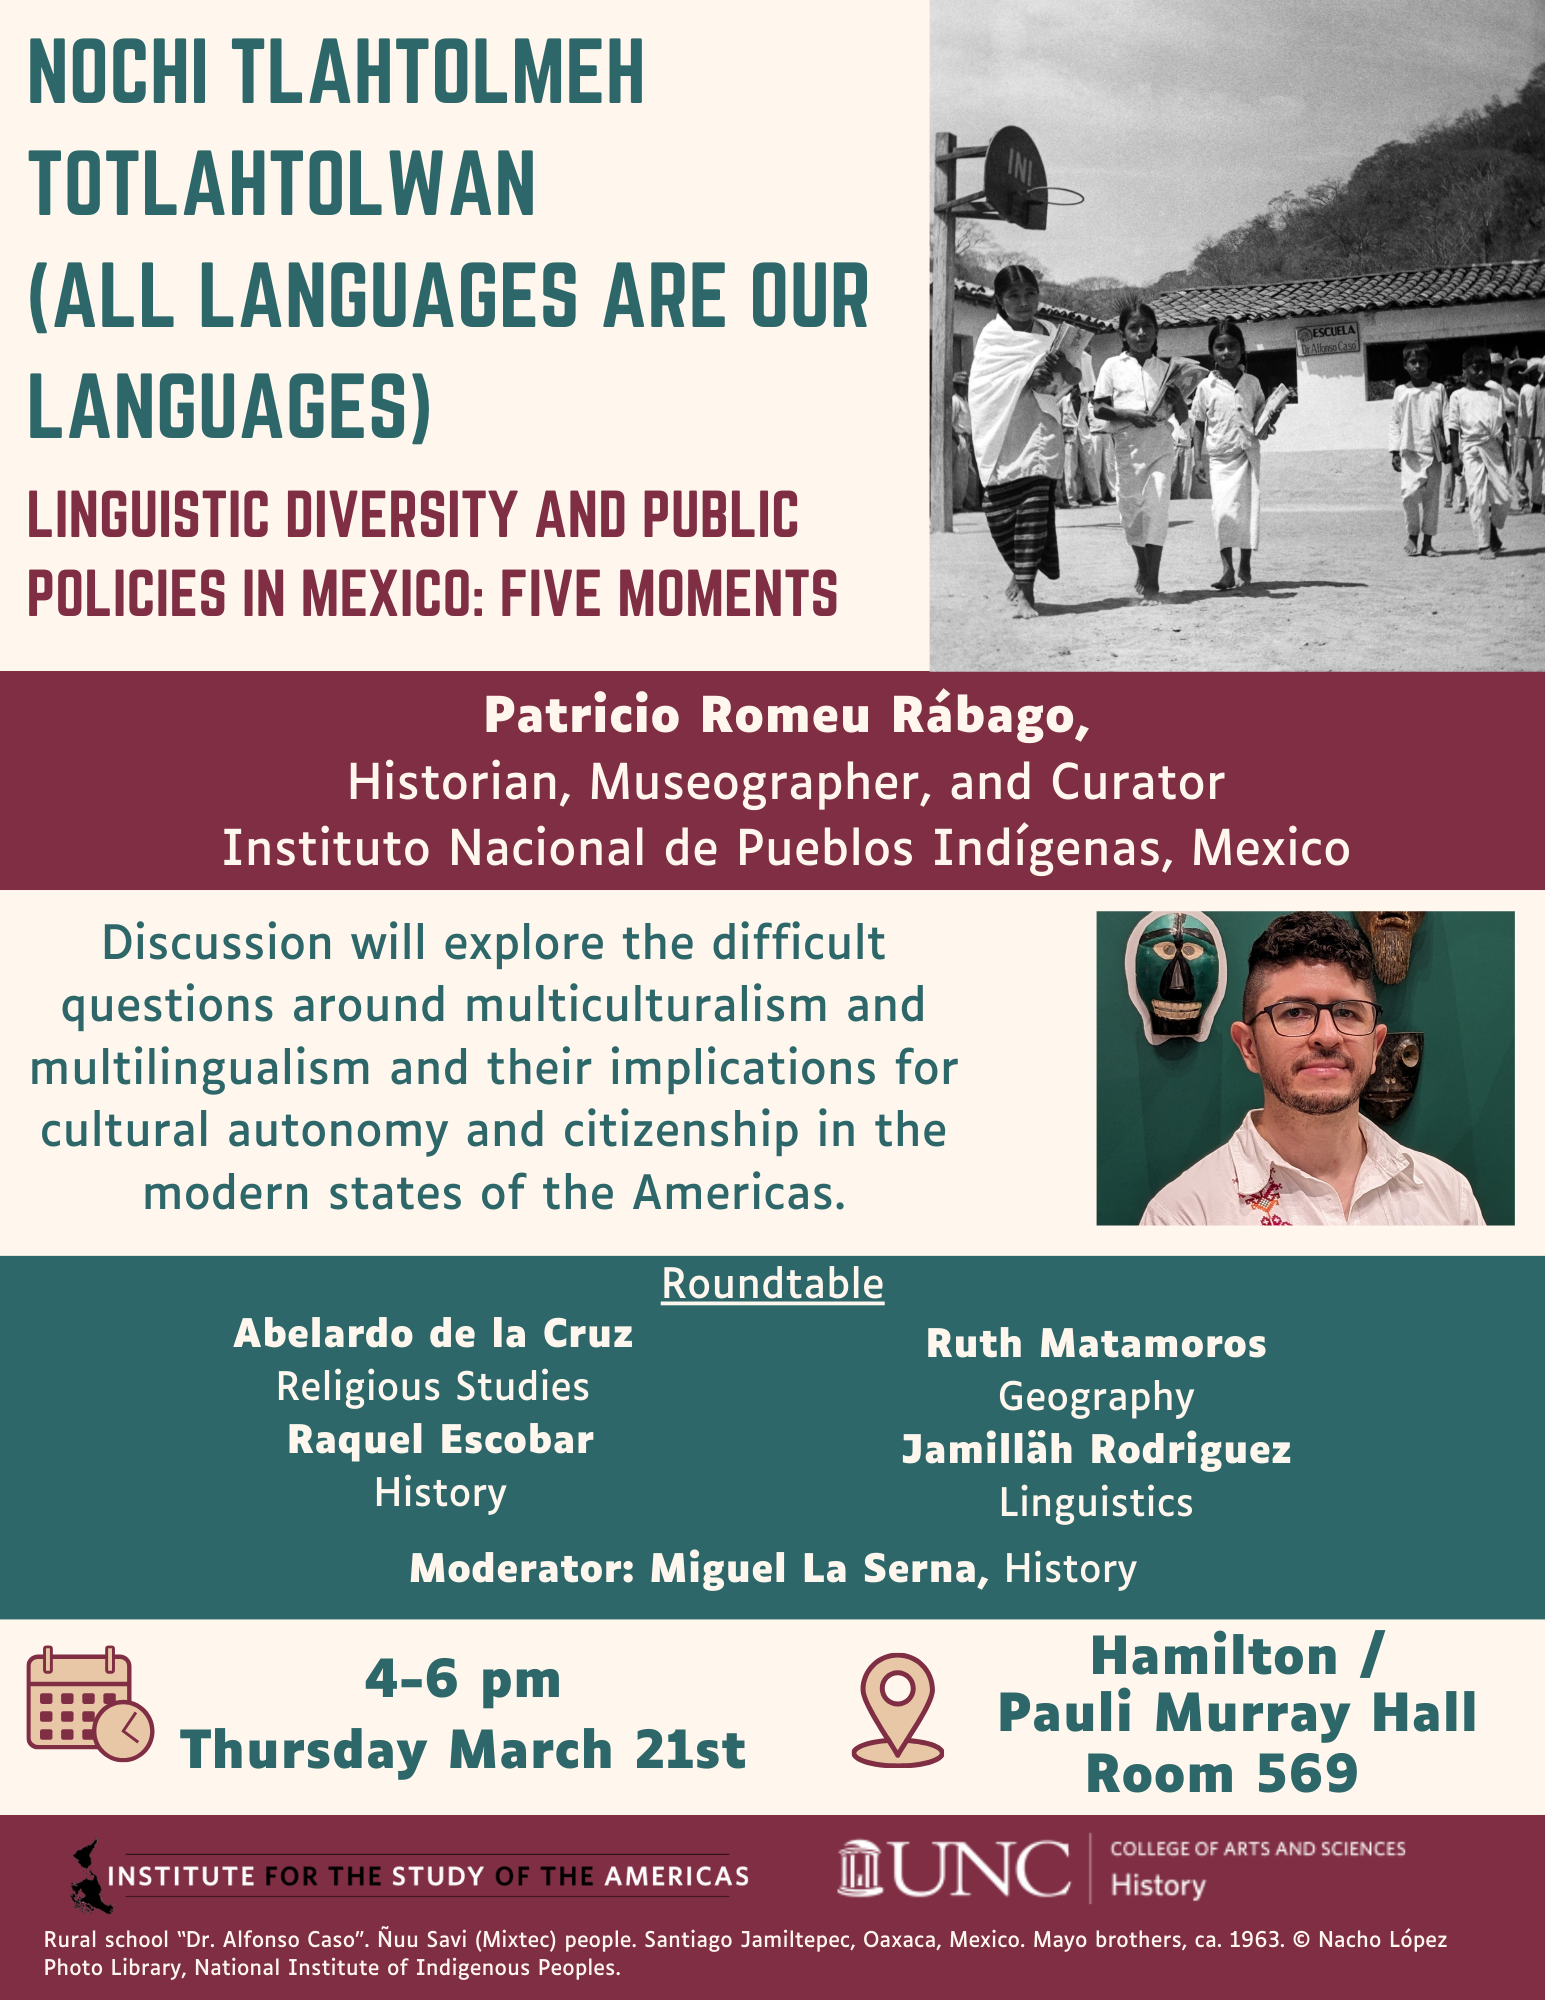 Nochi tlahtolmeh totlahtolwan (All languages are our languages). Linguistic diversity and public policies in Mexico: five moments